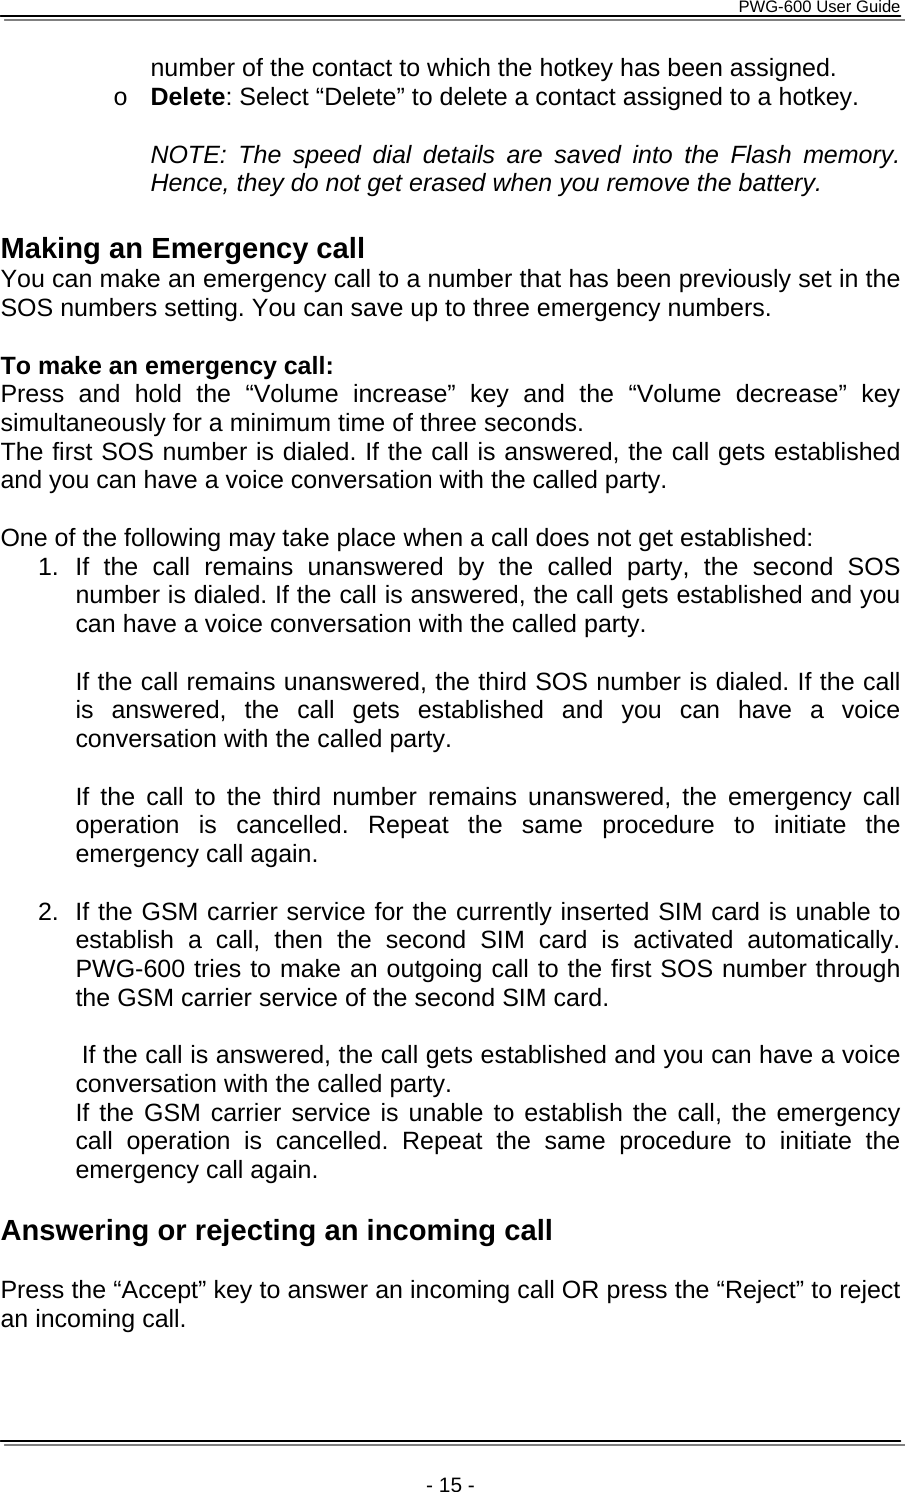      PWG-600 User Guide    - 15 - number of the contact to which the hotkey has been assigned. o Delete: Select “Delete” to delete a contact assigned to a hotkey.  NOTE: The speed dial details are saved into the Flash memory. Hence, they do not get erased when you remove the battery.  Making an Emergency call You can make an emergency call to a number that has been previously set in the SOS numbers setting. You can save up to three emergency numbers.  To make an emergency call: Press and hold the “Volume increase” key and the “Volume decrease” key simultaneously for a minimum time of three seconds. The first SOS number is dialed. If the call is answered, the call gets established and you can have a voice conversation with the called party.  One of the following may take place when a call does not get established: 1. If the call remains unanswered by the called party, the second SOS number is dialed. If the call is answered, the call gets established and you can have a voice conversation with the called party.  If the call remains unanswered, the third SOS number is dialed. If the call is answered, the call gets established and you can have a voice conversation with the called party.  If the call to the third number remains unanswered, the emergency call operation is cancelled. Repeat the same procedure to initiate the emergency call again.  2.  If the GSM carrier service for the currently inserted SIM card is unable to establish a call, then the second SIM card is activated automatically. PWG-600 tries to make an outgoing call to the first SOS number through the GSM carrier service of the second SIM card.  If the call is answered, the call gets established and you can have a voice conversation with the called party.                                  If the GSM carrier service is unable to establish the call, the emergency call operation is cancelled. Repeat the same procedure to initiate the emergency call again.  Answering or rejecting an incoming call  Press the “Accept” key to answer an incoming call OR press the “Reject” to reject an incoming call.   